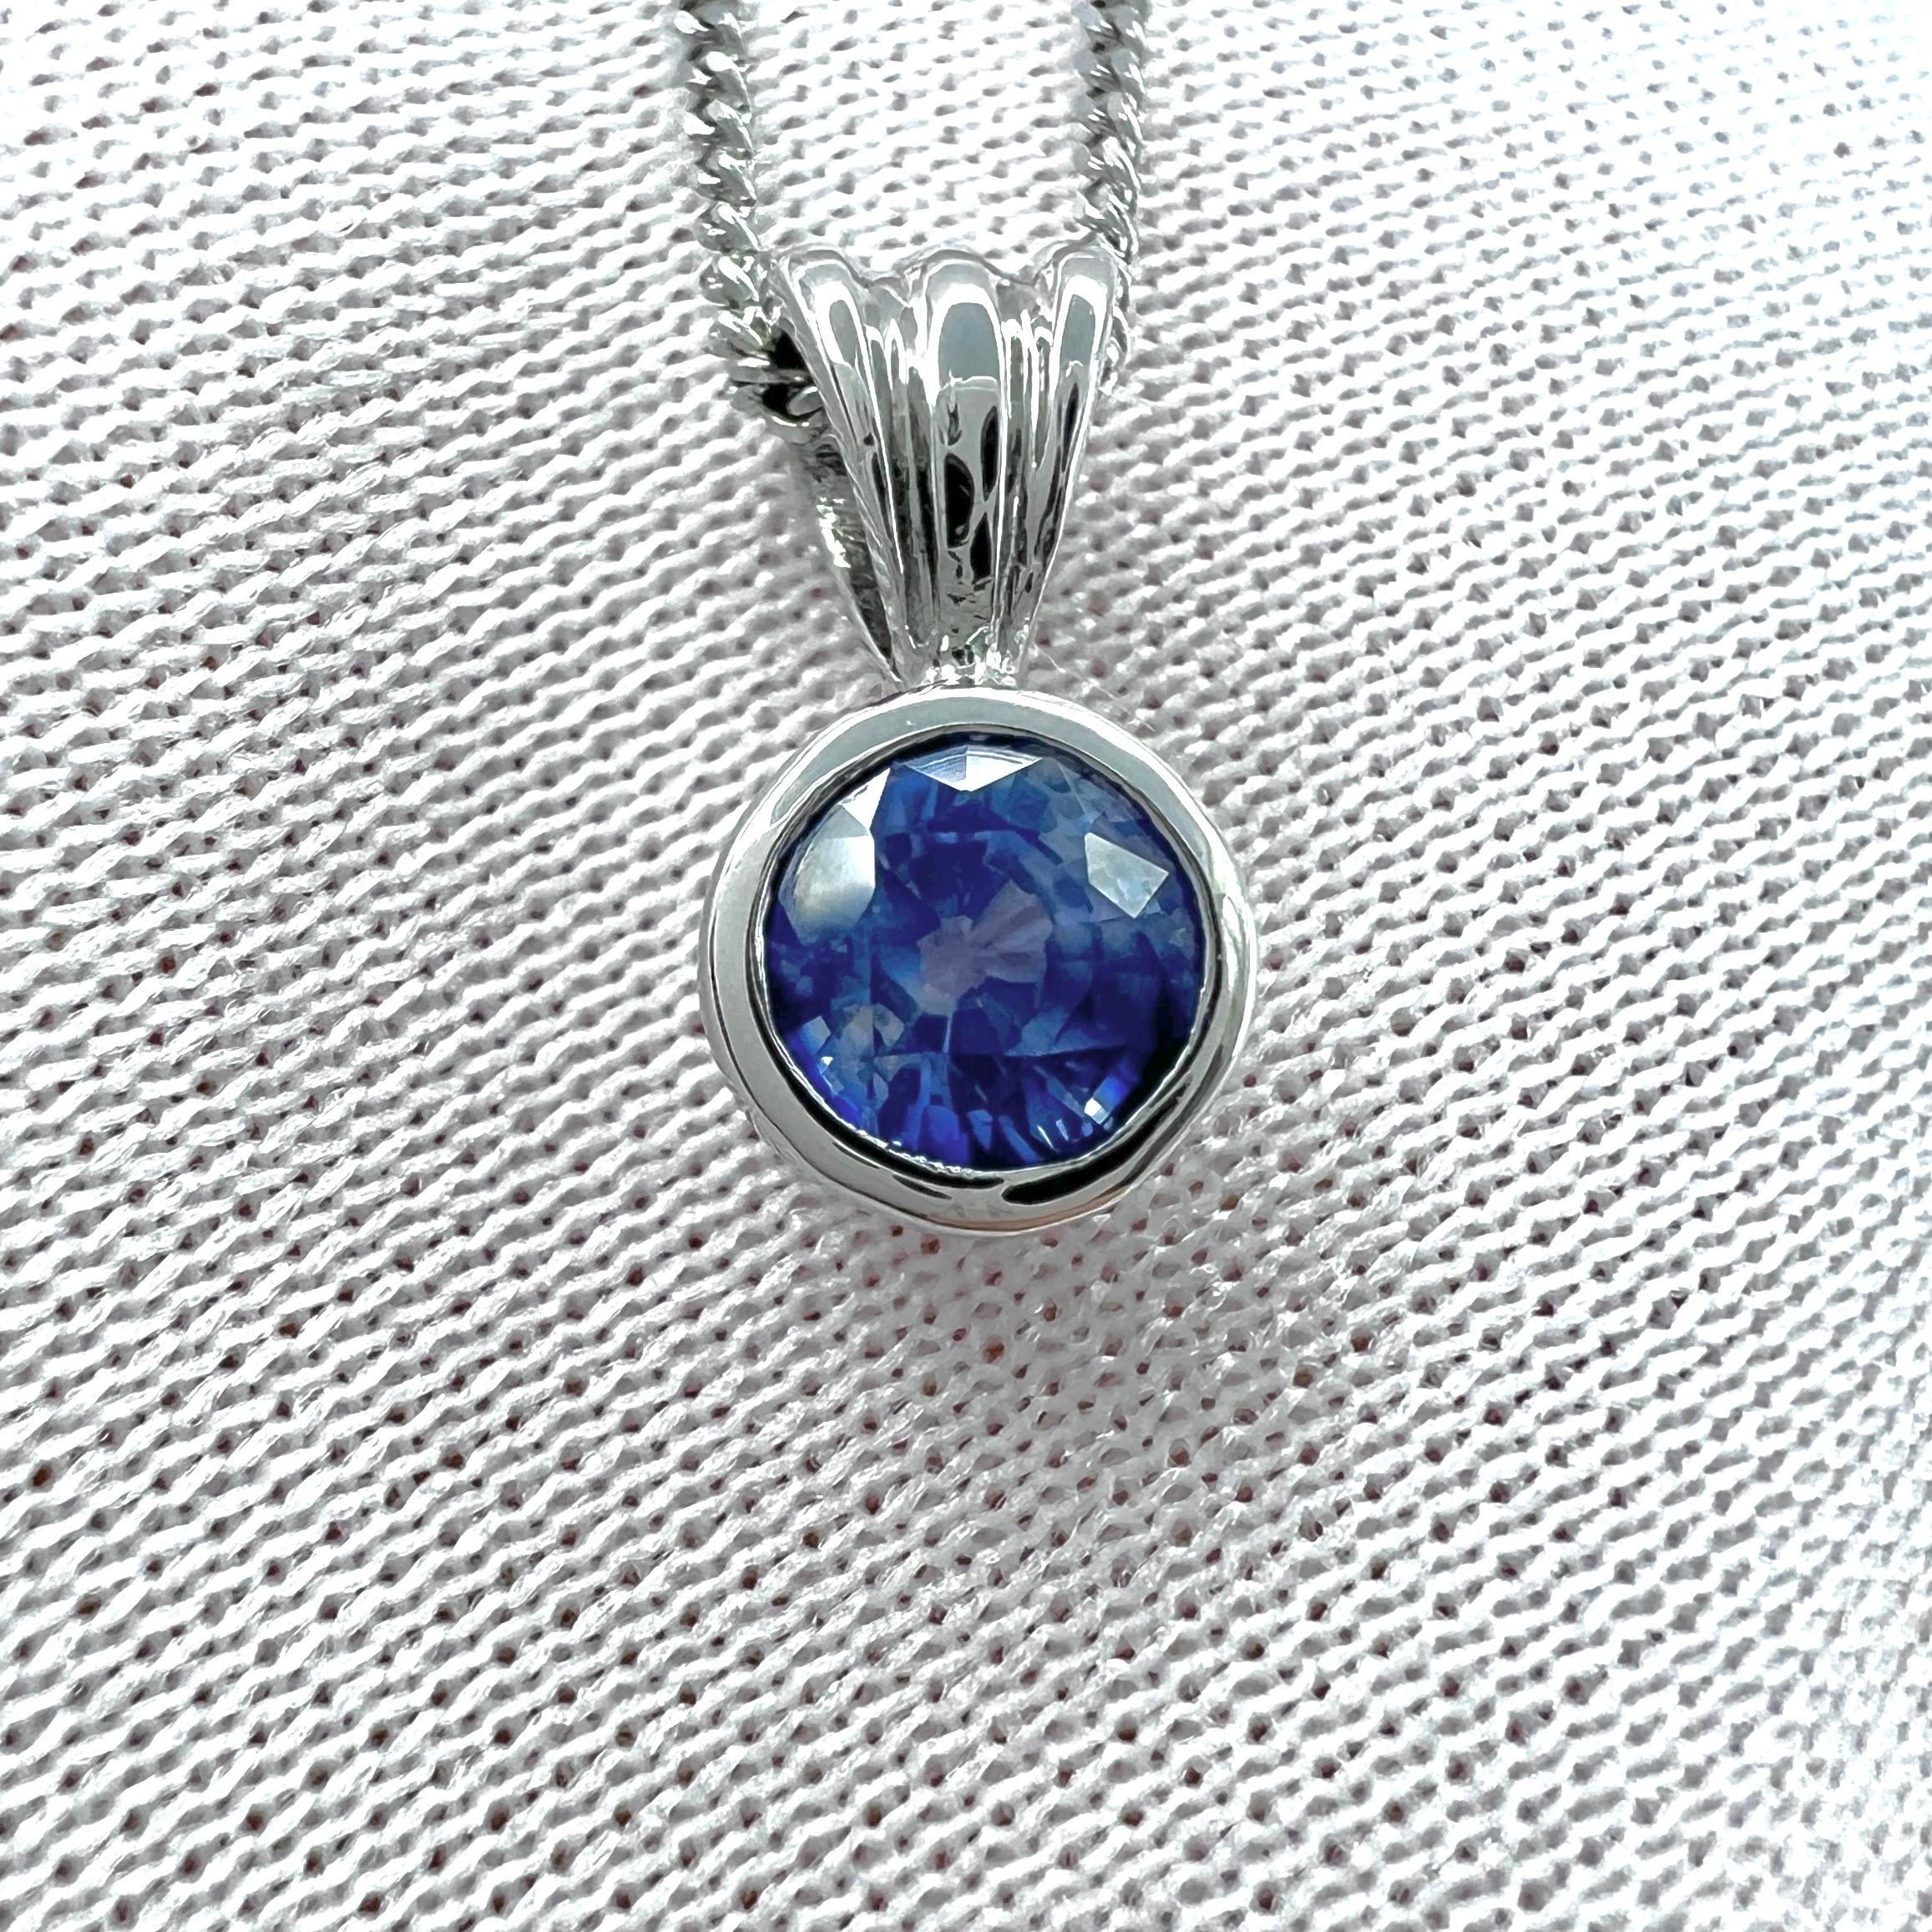 Fine Cornflower Blue Ceylon Sapphire 18k White Gold Round Cut Bezel Rubover Pendant Necklace.

0.85 Carat sapphire with a beautiful vivid cornflower blue colour and excellent clarity, a very clean stone.
Mined in Sri Lanka, source of some of the